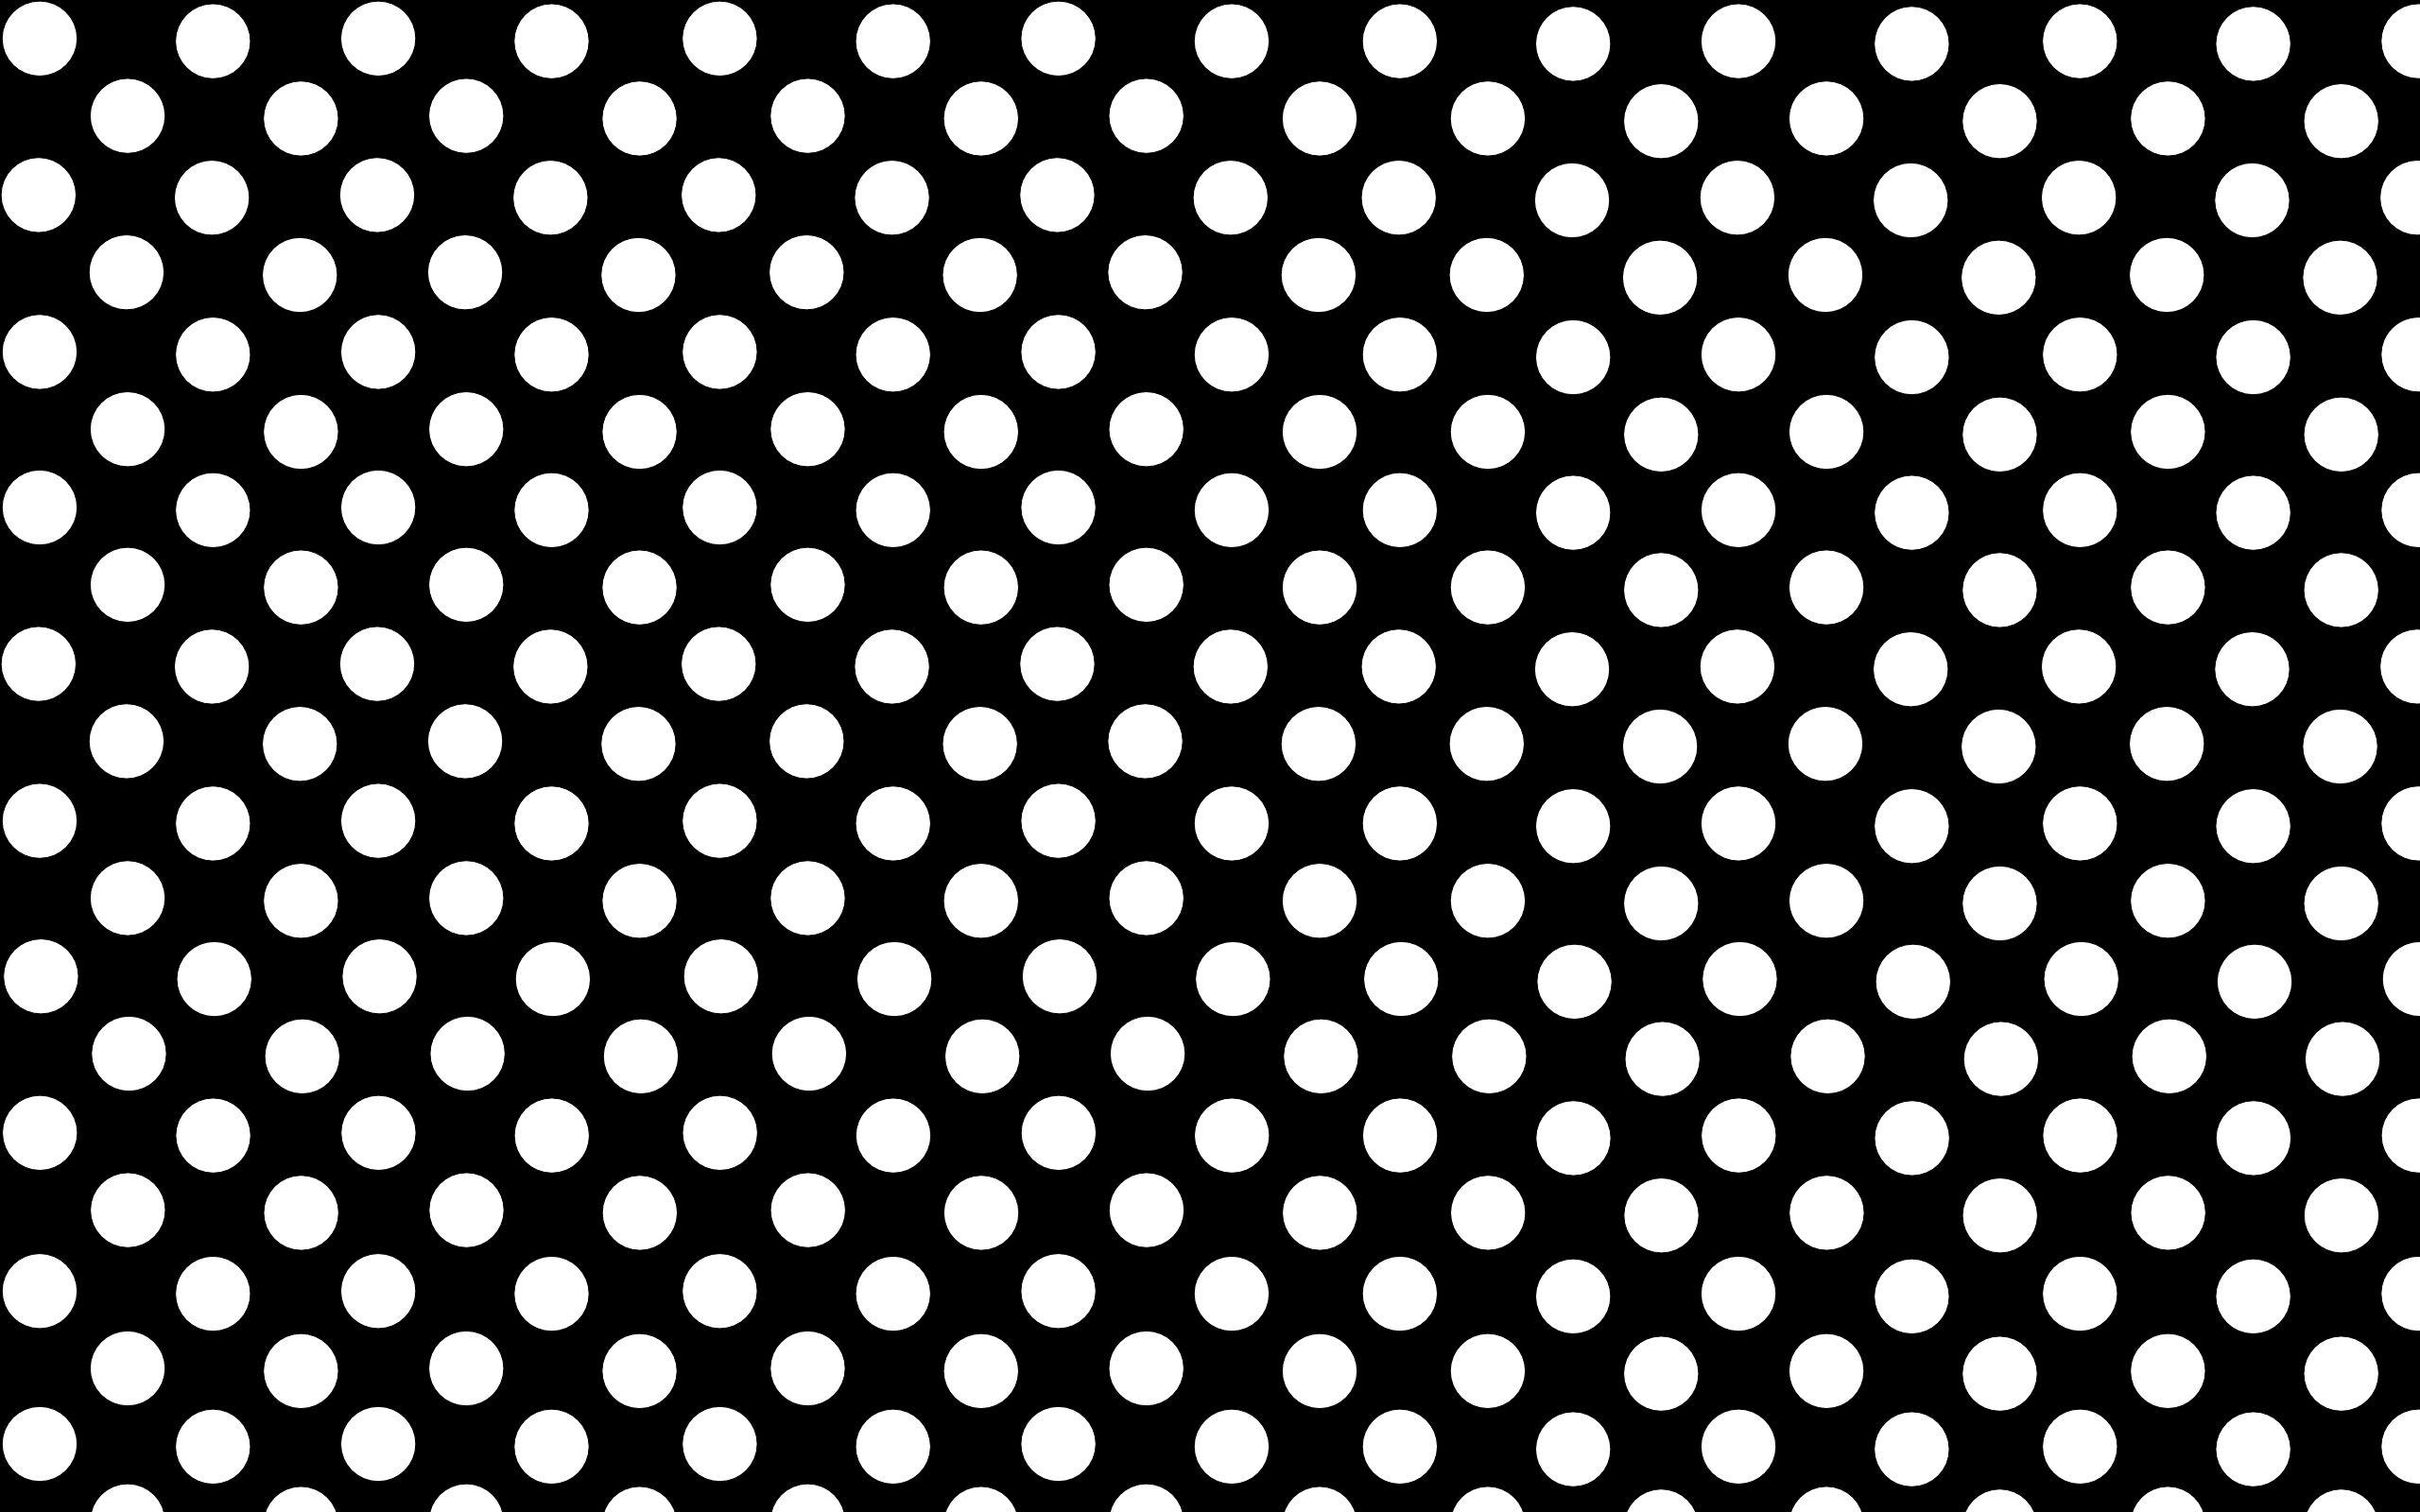 Black and white polka dot pattern design ideas and inspiration Love this  speckled monochrome print  Polka dot pattern design Monochrome prints  Pattern